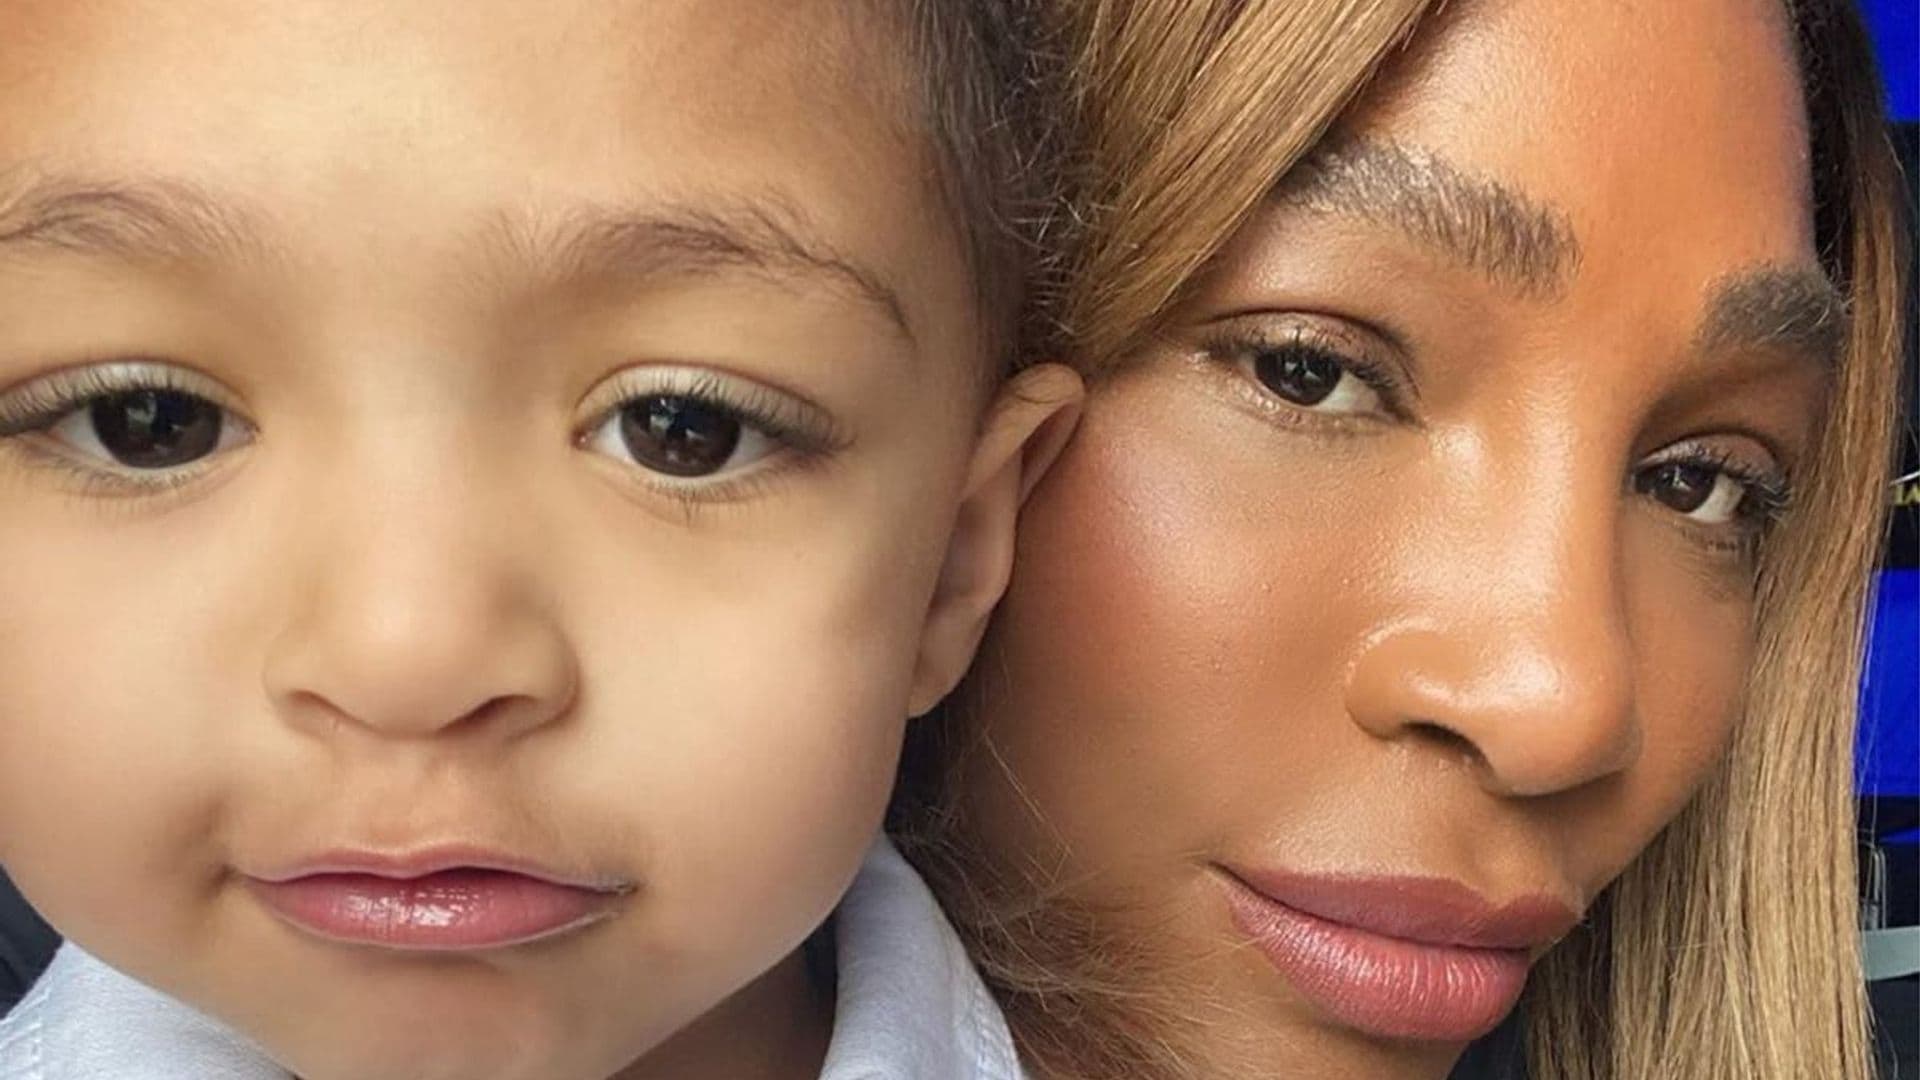 Serena Williams’ daughter Olympia epic transformation into Spider-Man